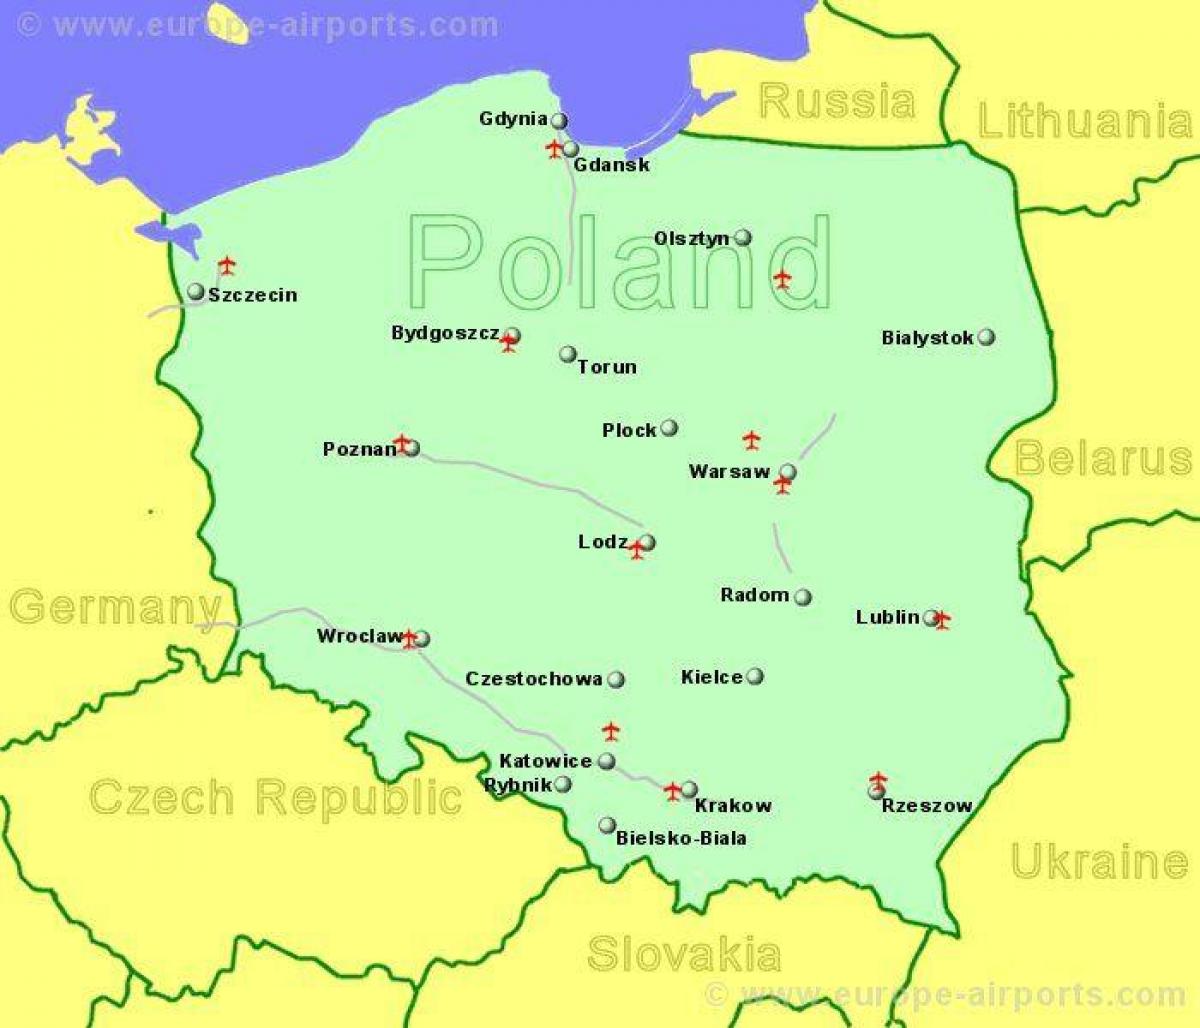 Poland airports map - Map of Poland showing airports (Eastern Europe